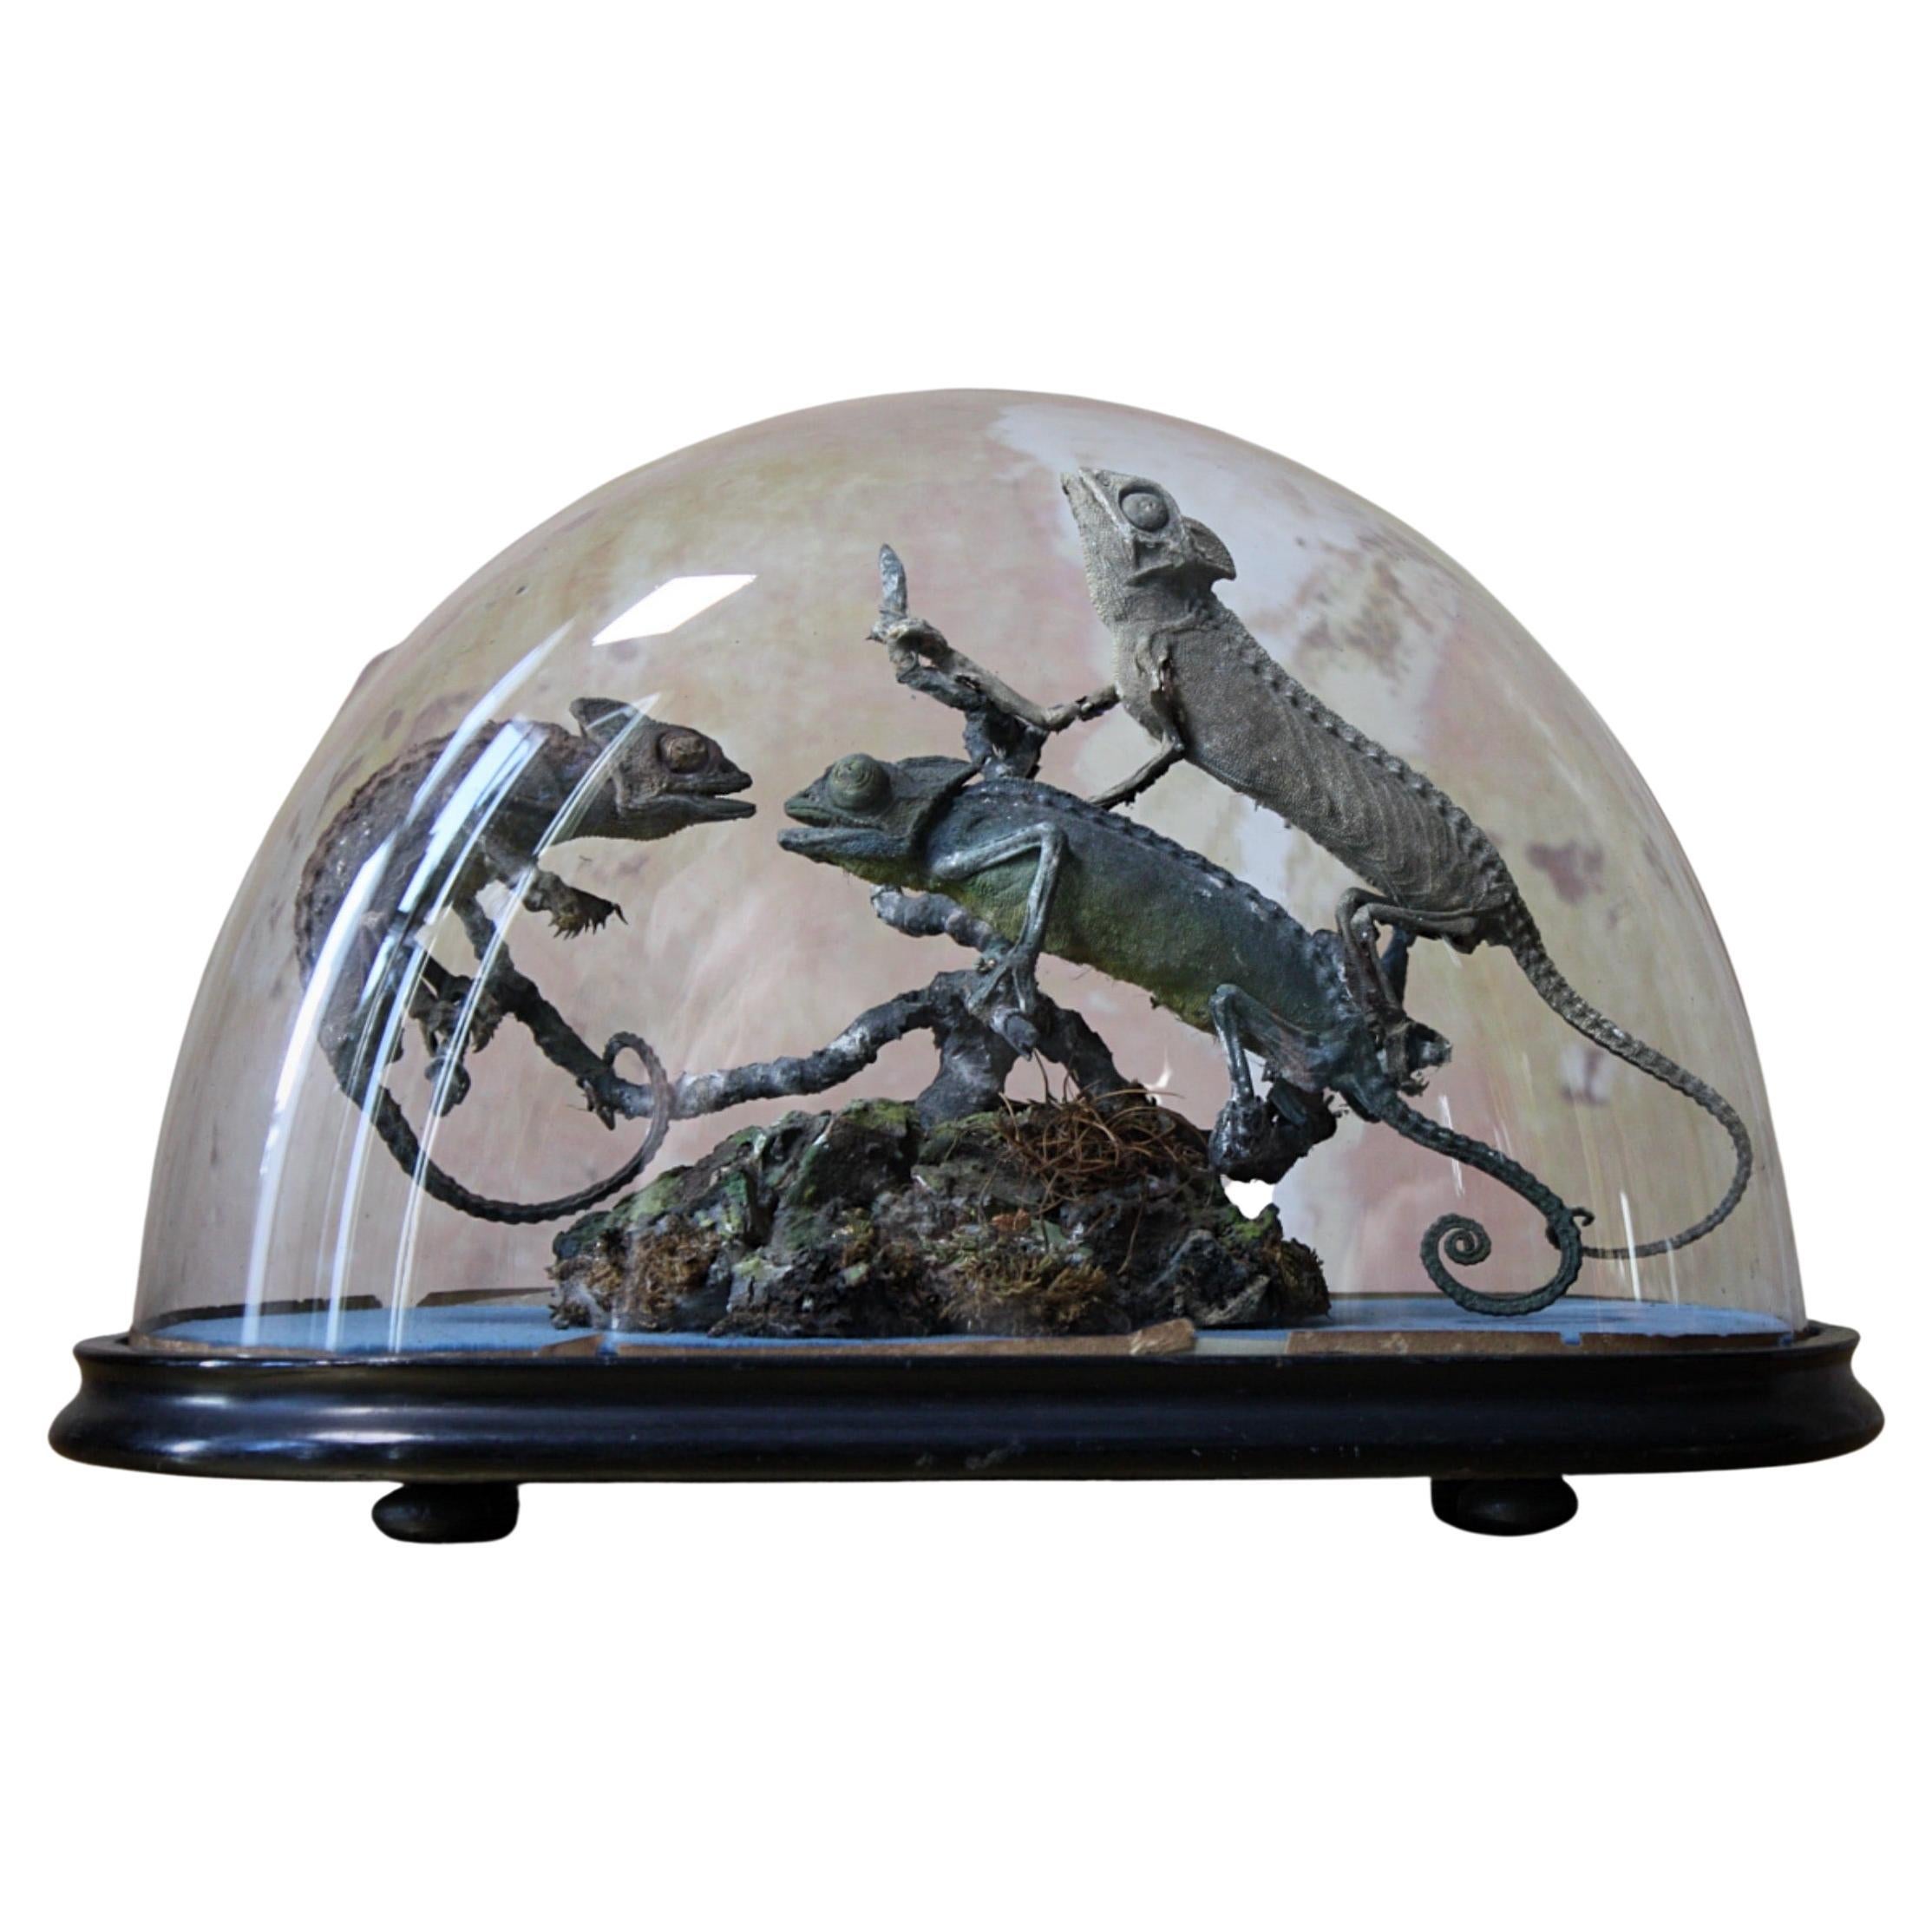 Trio of 19th Century Taxidermy Chameleon Lizards Under Glass Dome